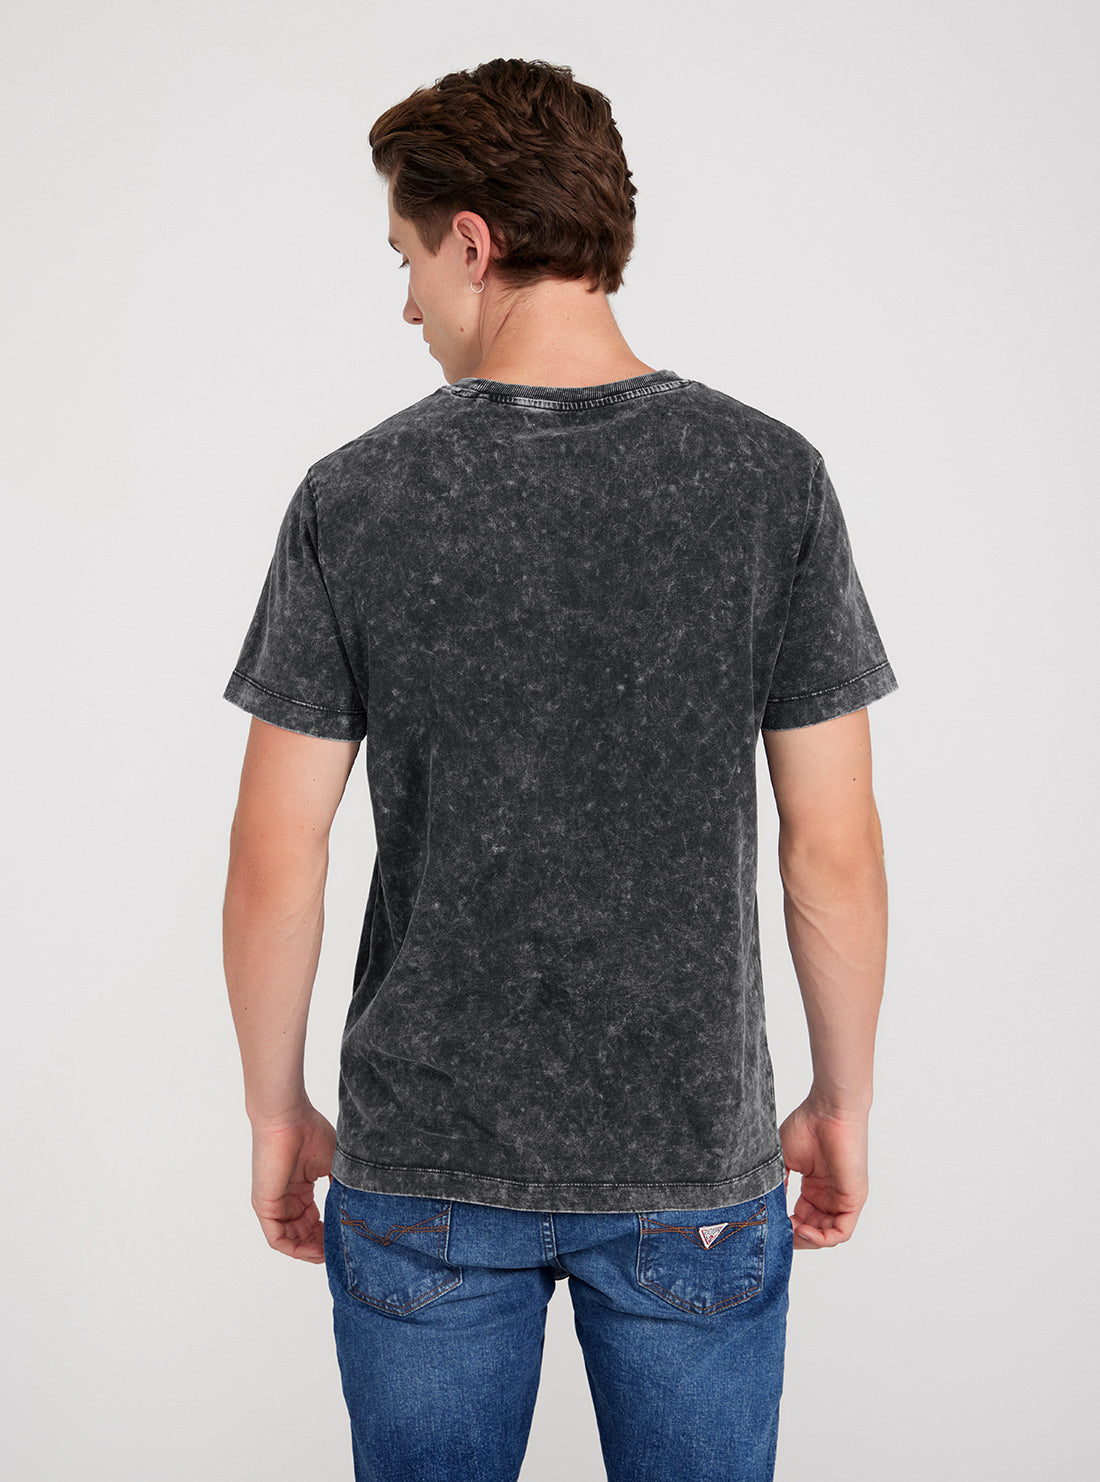 GUESS Black Wash Short Sleeve Patch T-Shirt back view